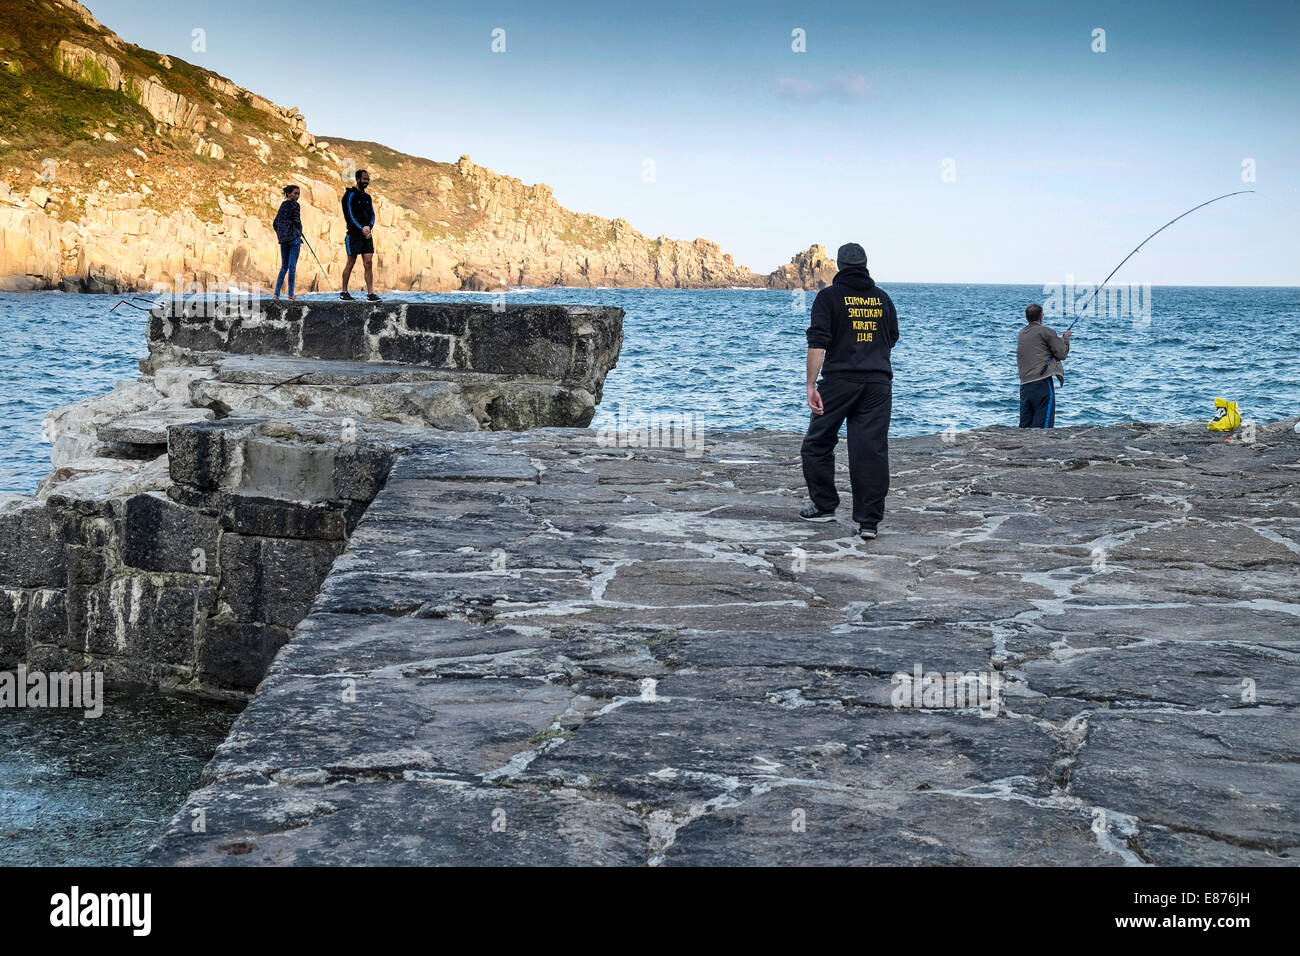 Anglers fishing off the remains of the neglected and damaged quay at Lamorna Cove in Cornwall. Stock Photo